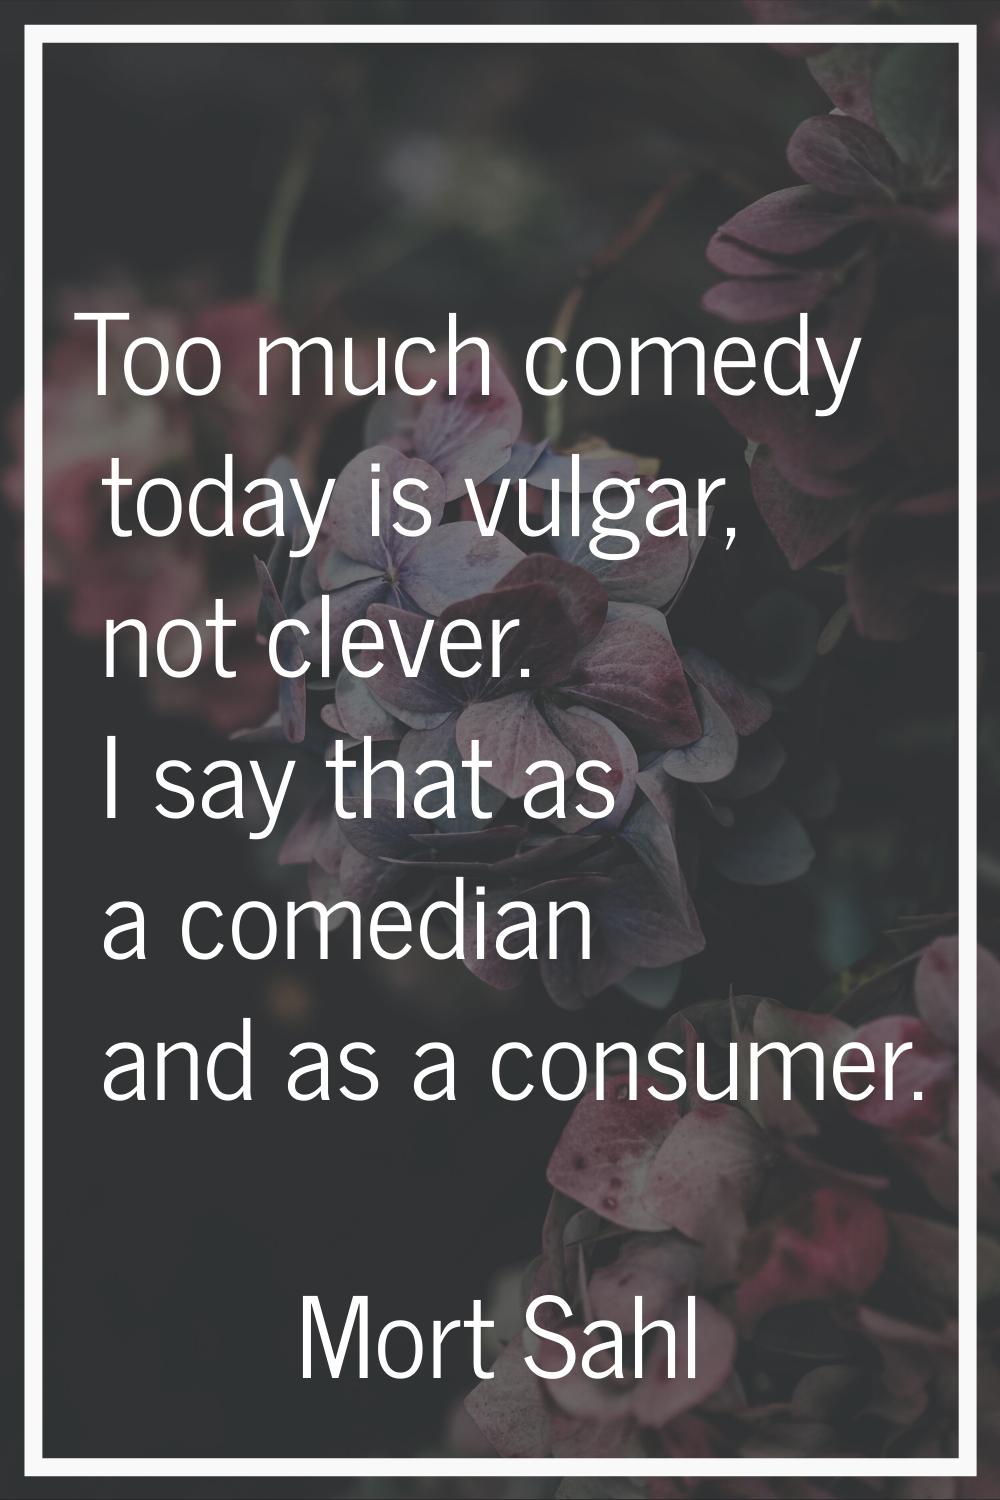 Too much comedy today is vulgar, not clever. I say that as a comedian and as a consumer.